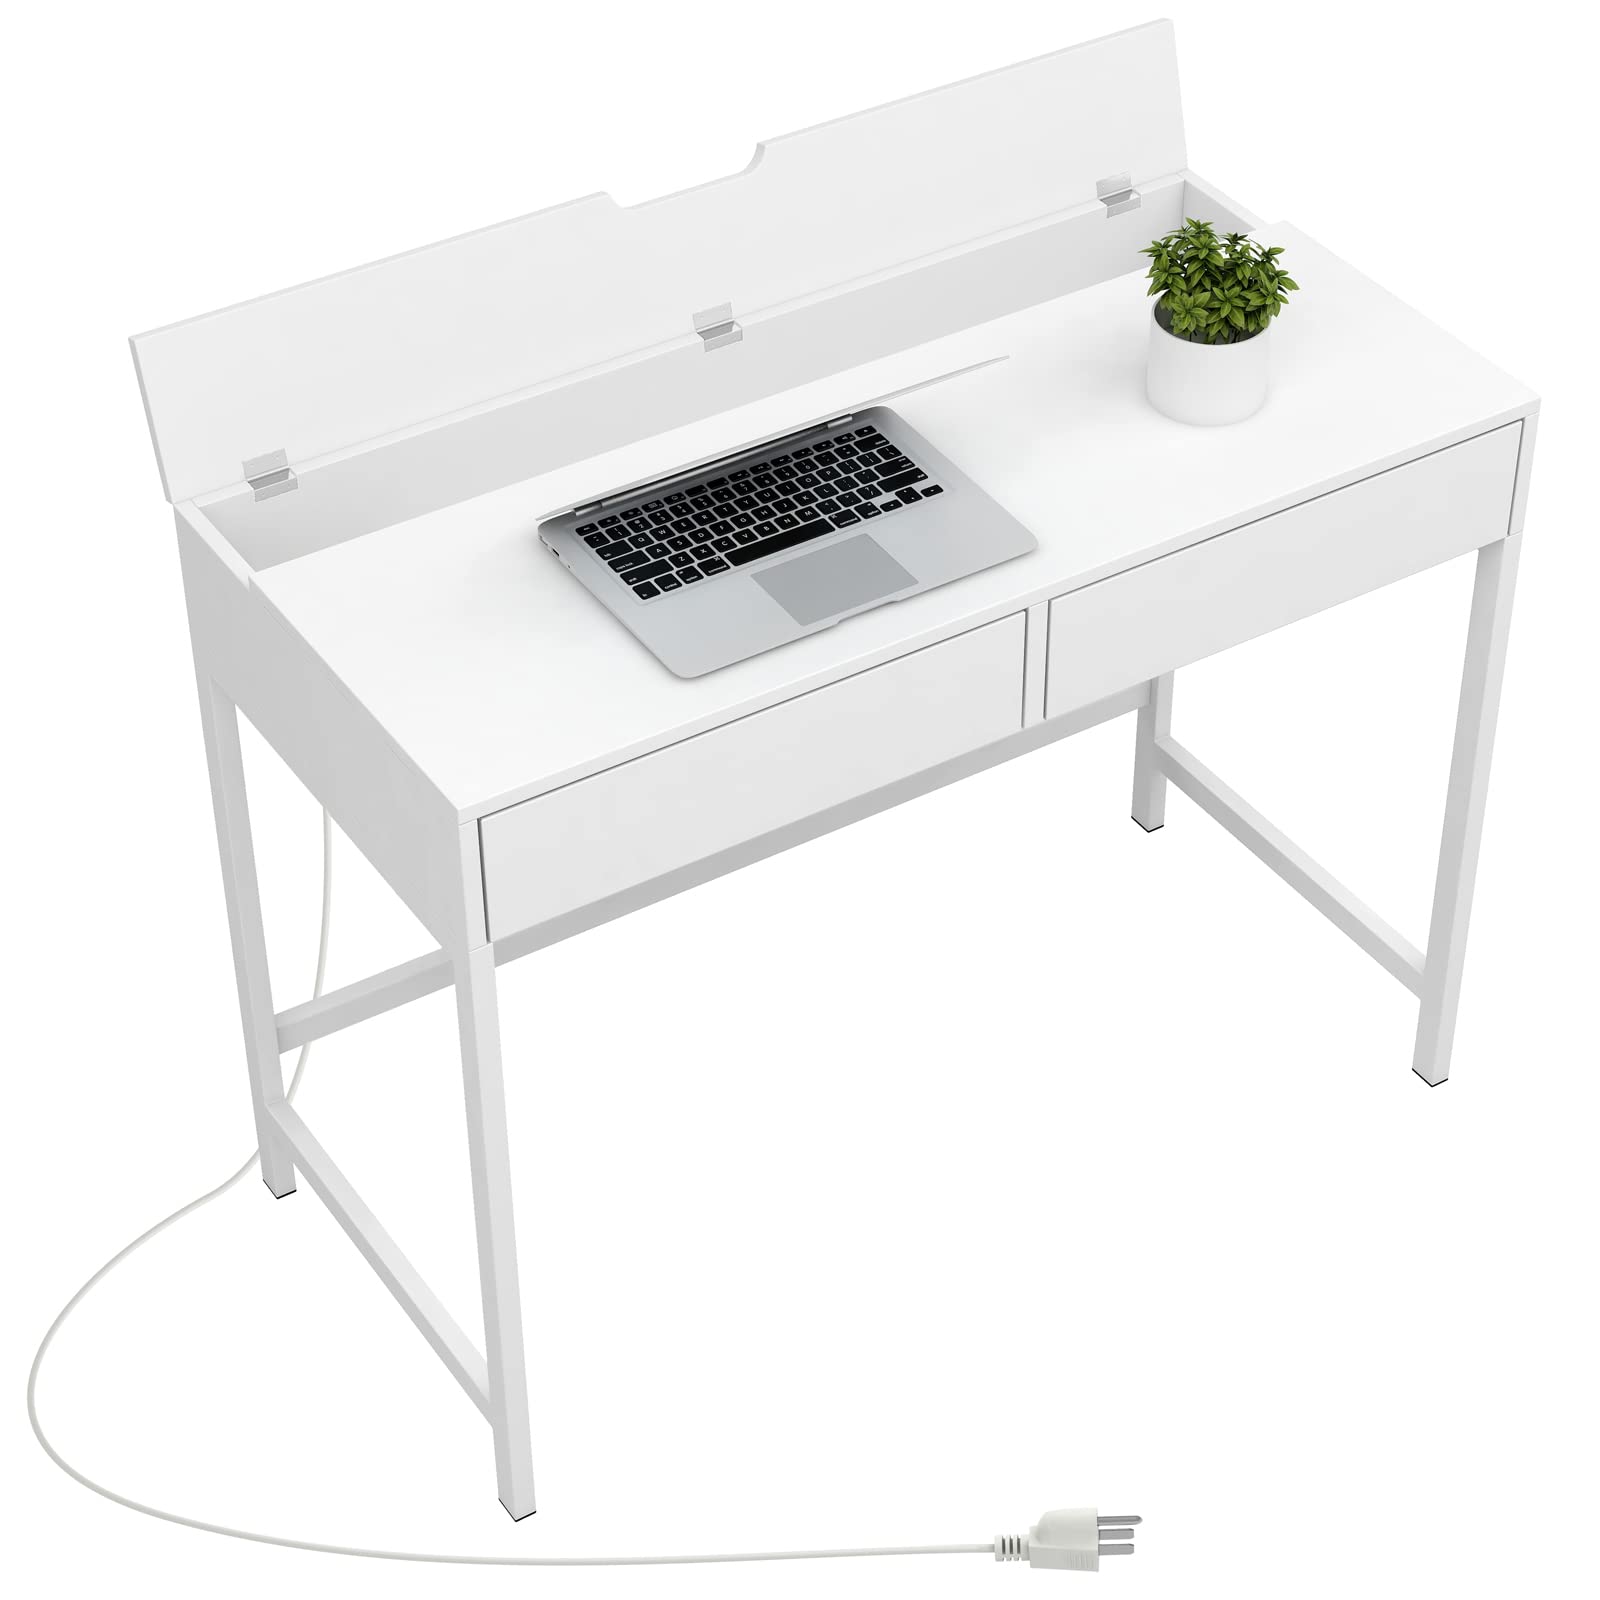 Treocho Computer Desk 39.4" Study Writing Table with USB for Home Office, White Metal Frame